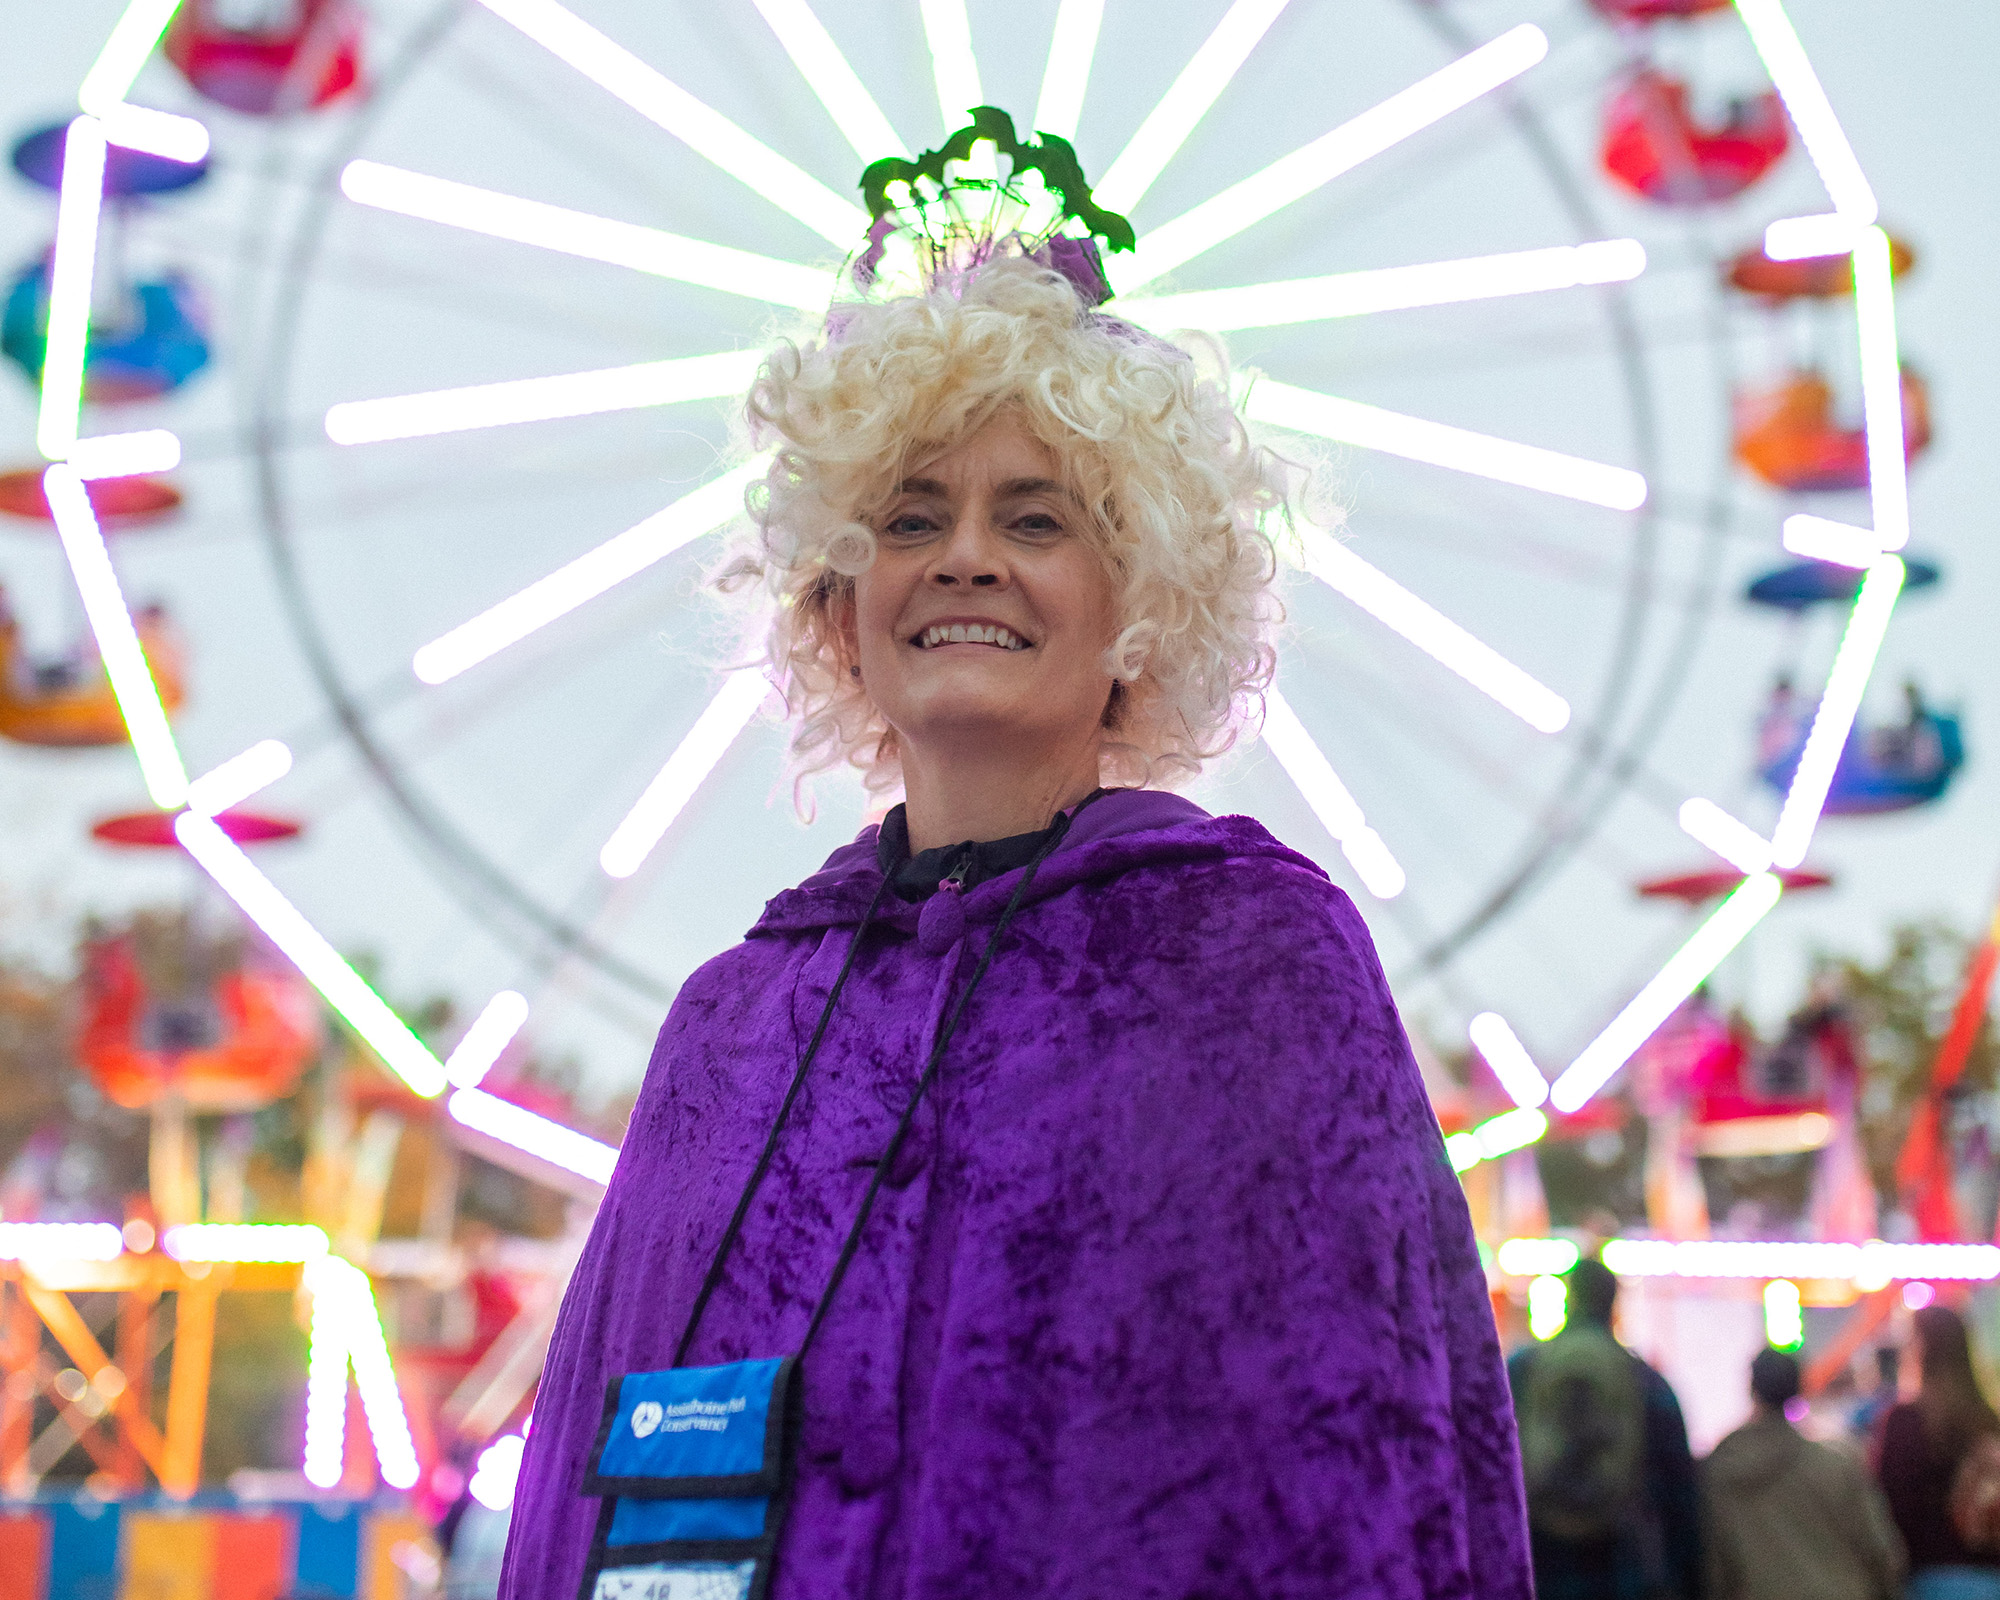 Boo at the Zoo volunteer in costume poses in front of a Ferris wheel